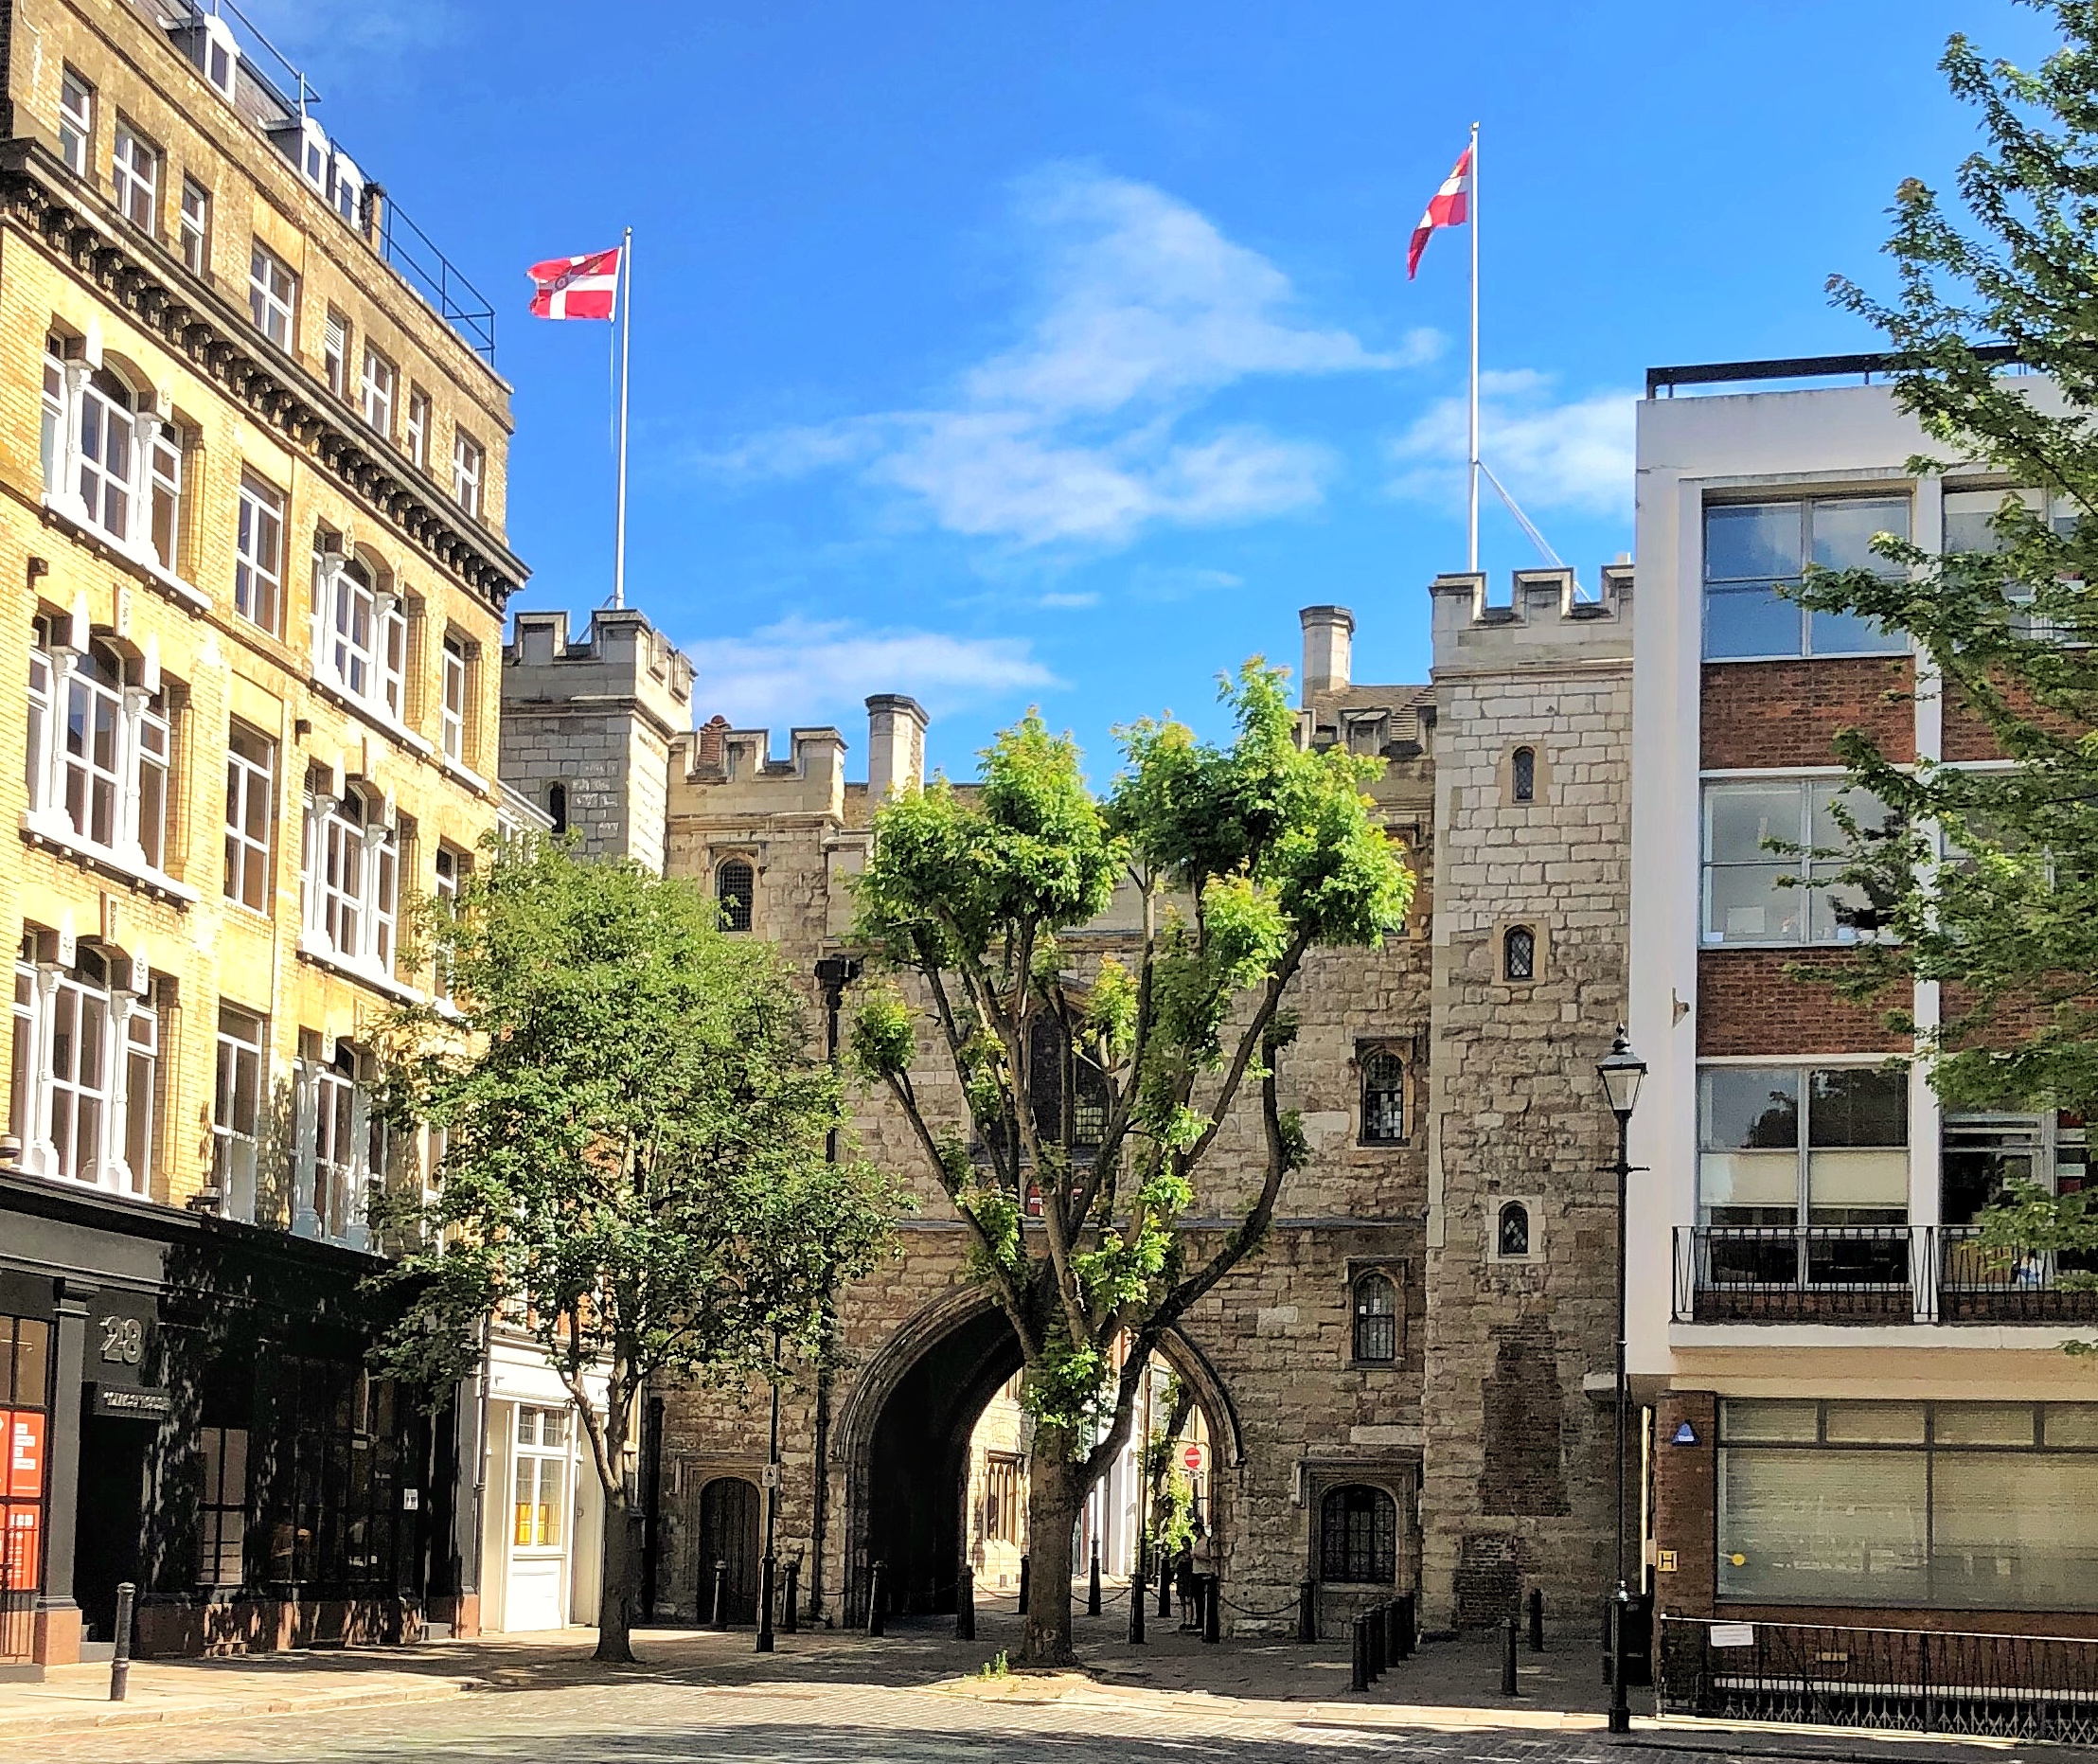 A summer's day at St John's Gate | theLONDON i